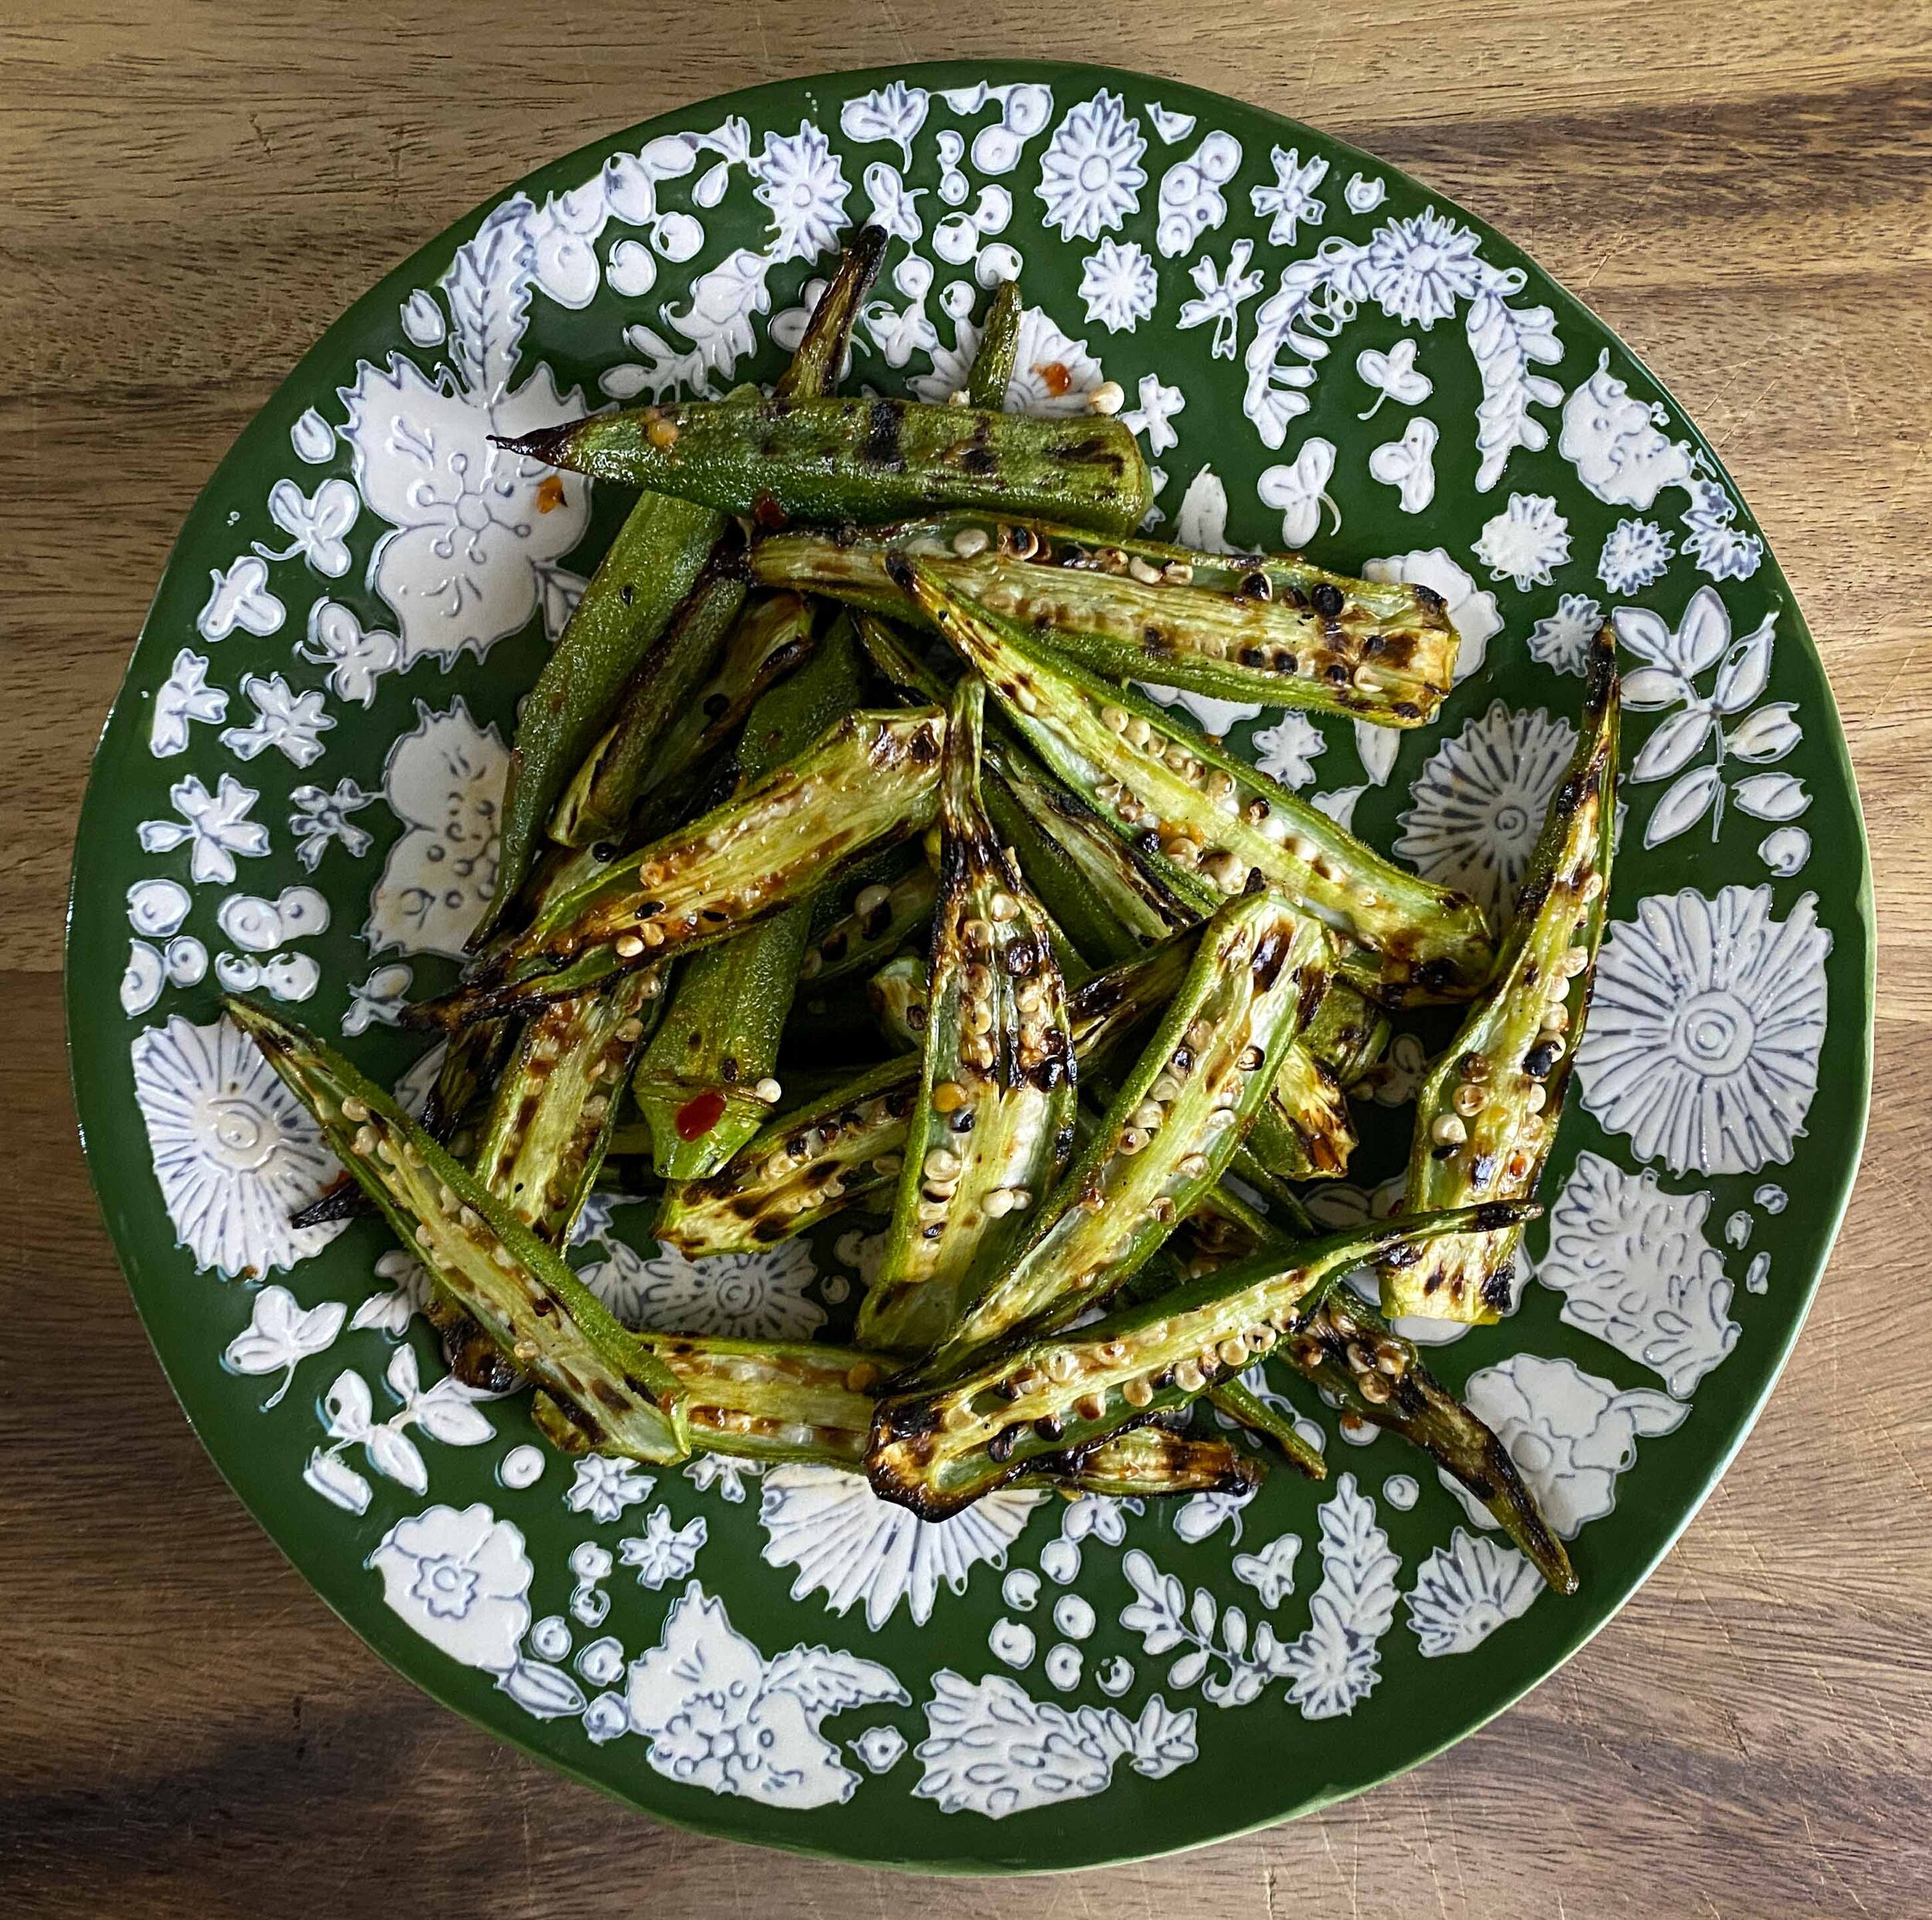 Charred Okra with a Little Spice